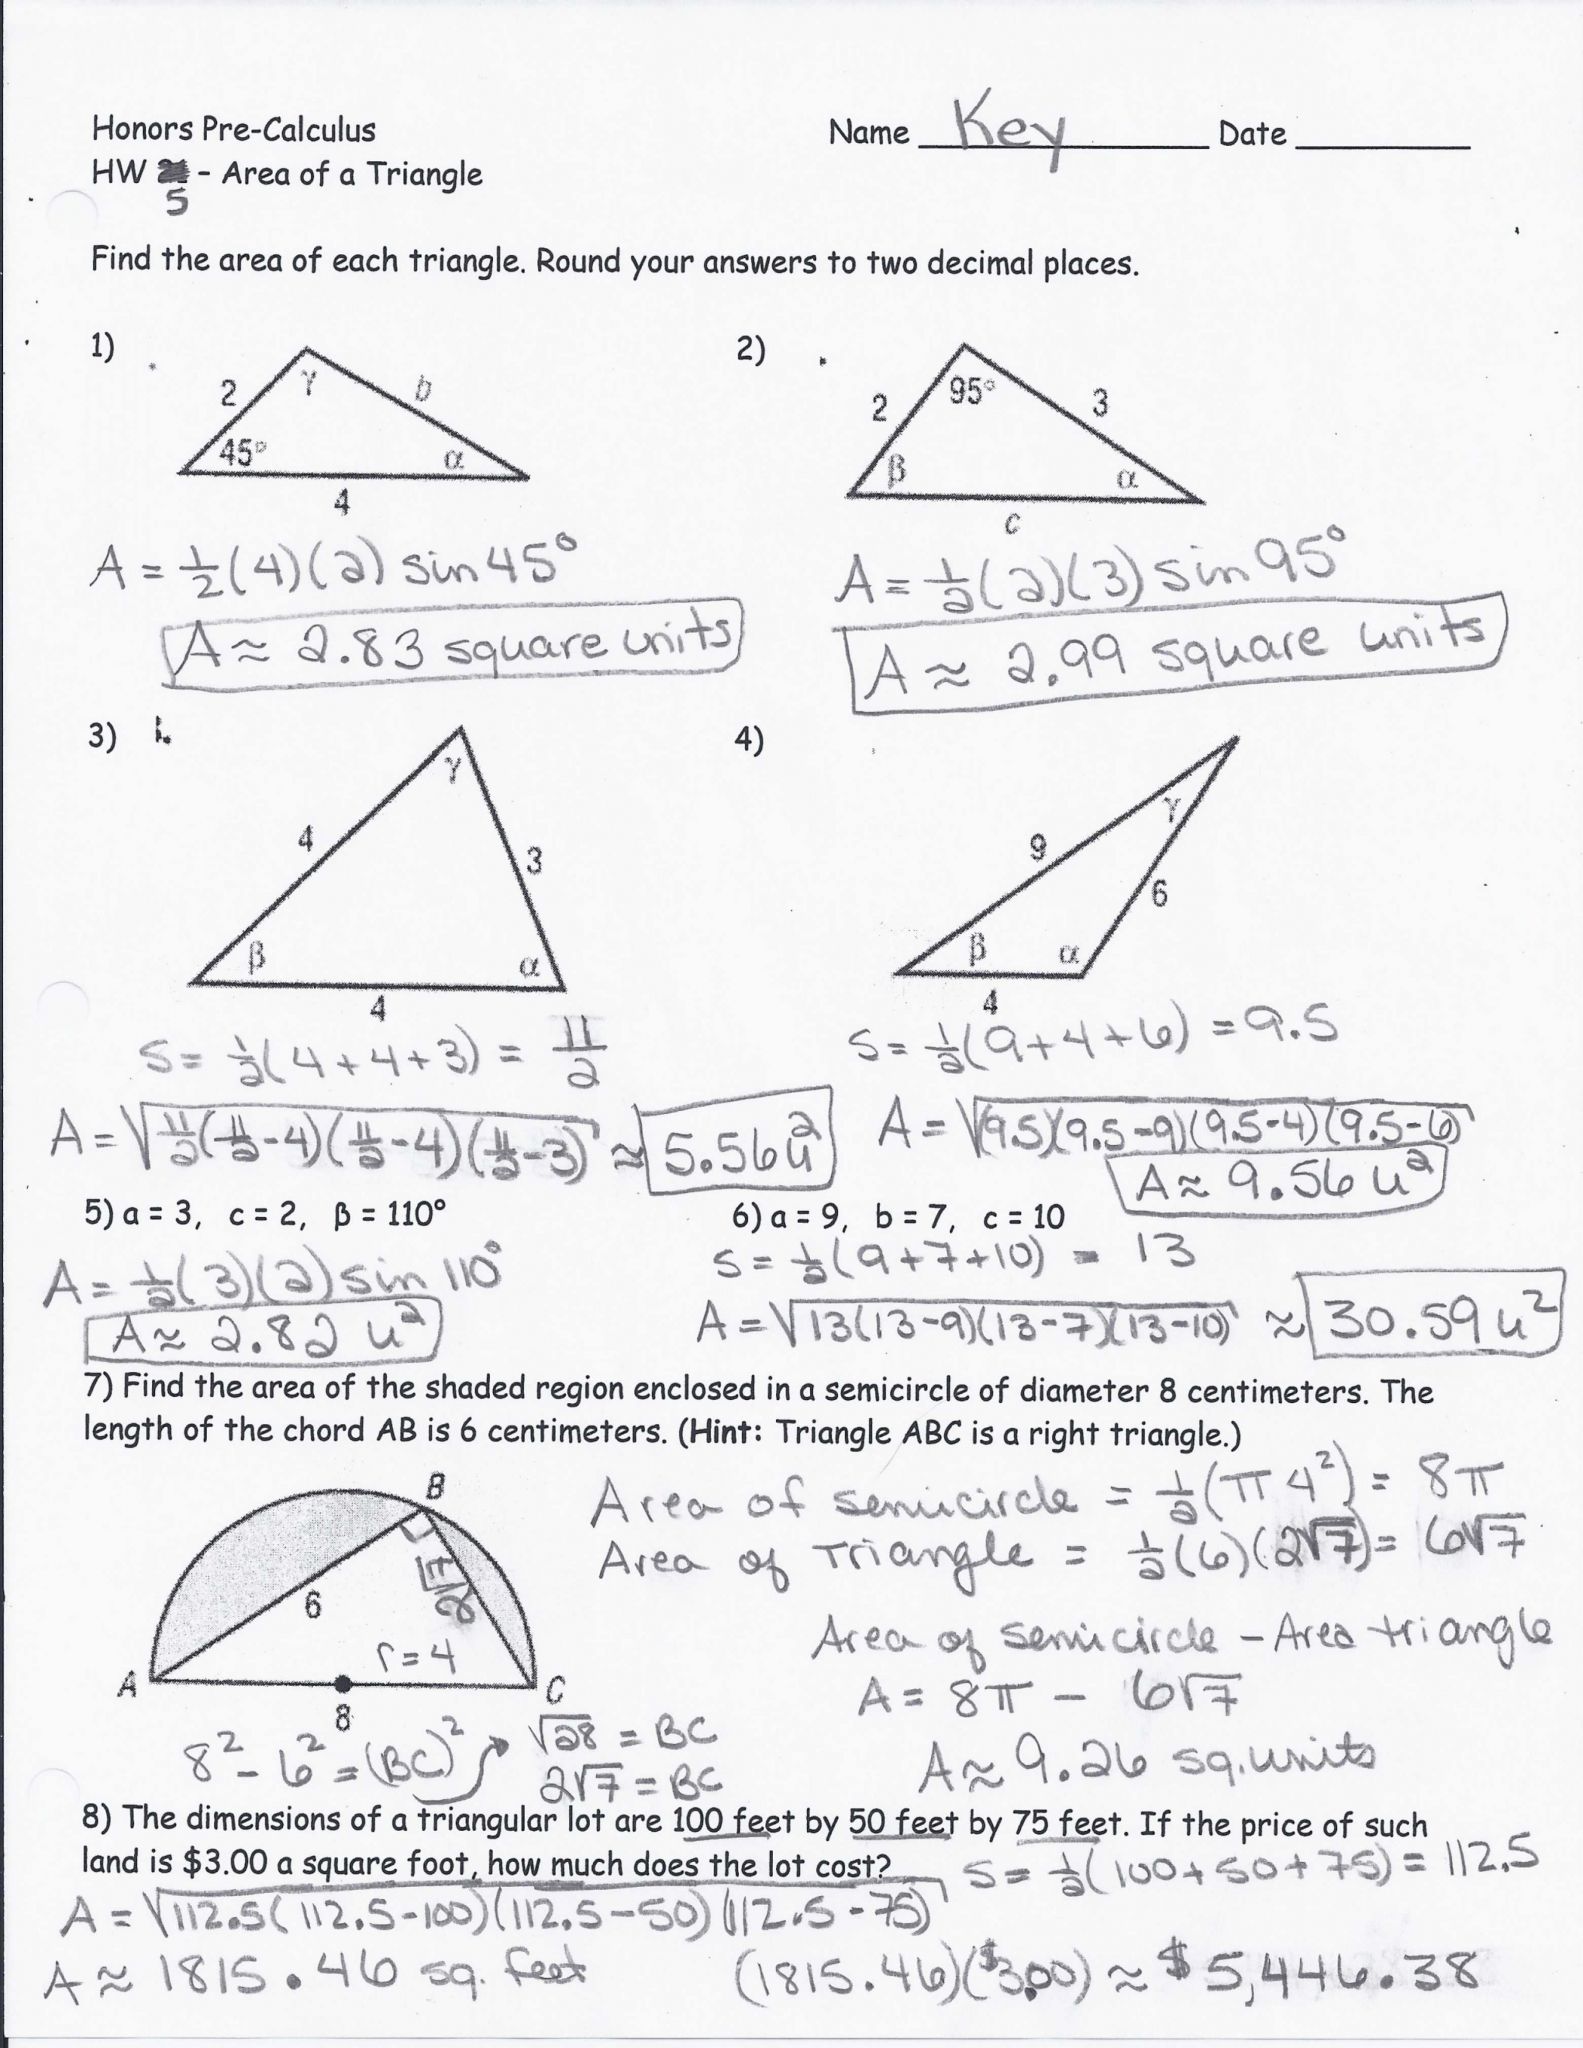 Acceleration Worksheet Answer Key as Well as Physics Vector Worksheet with Answers